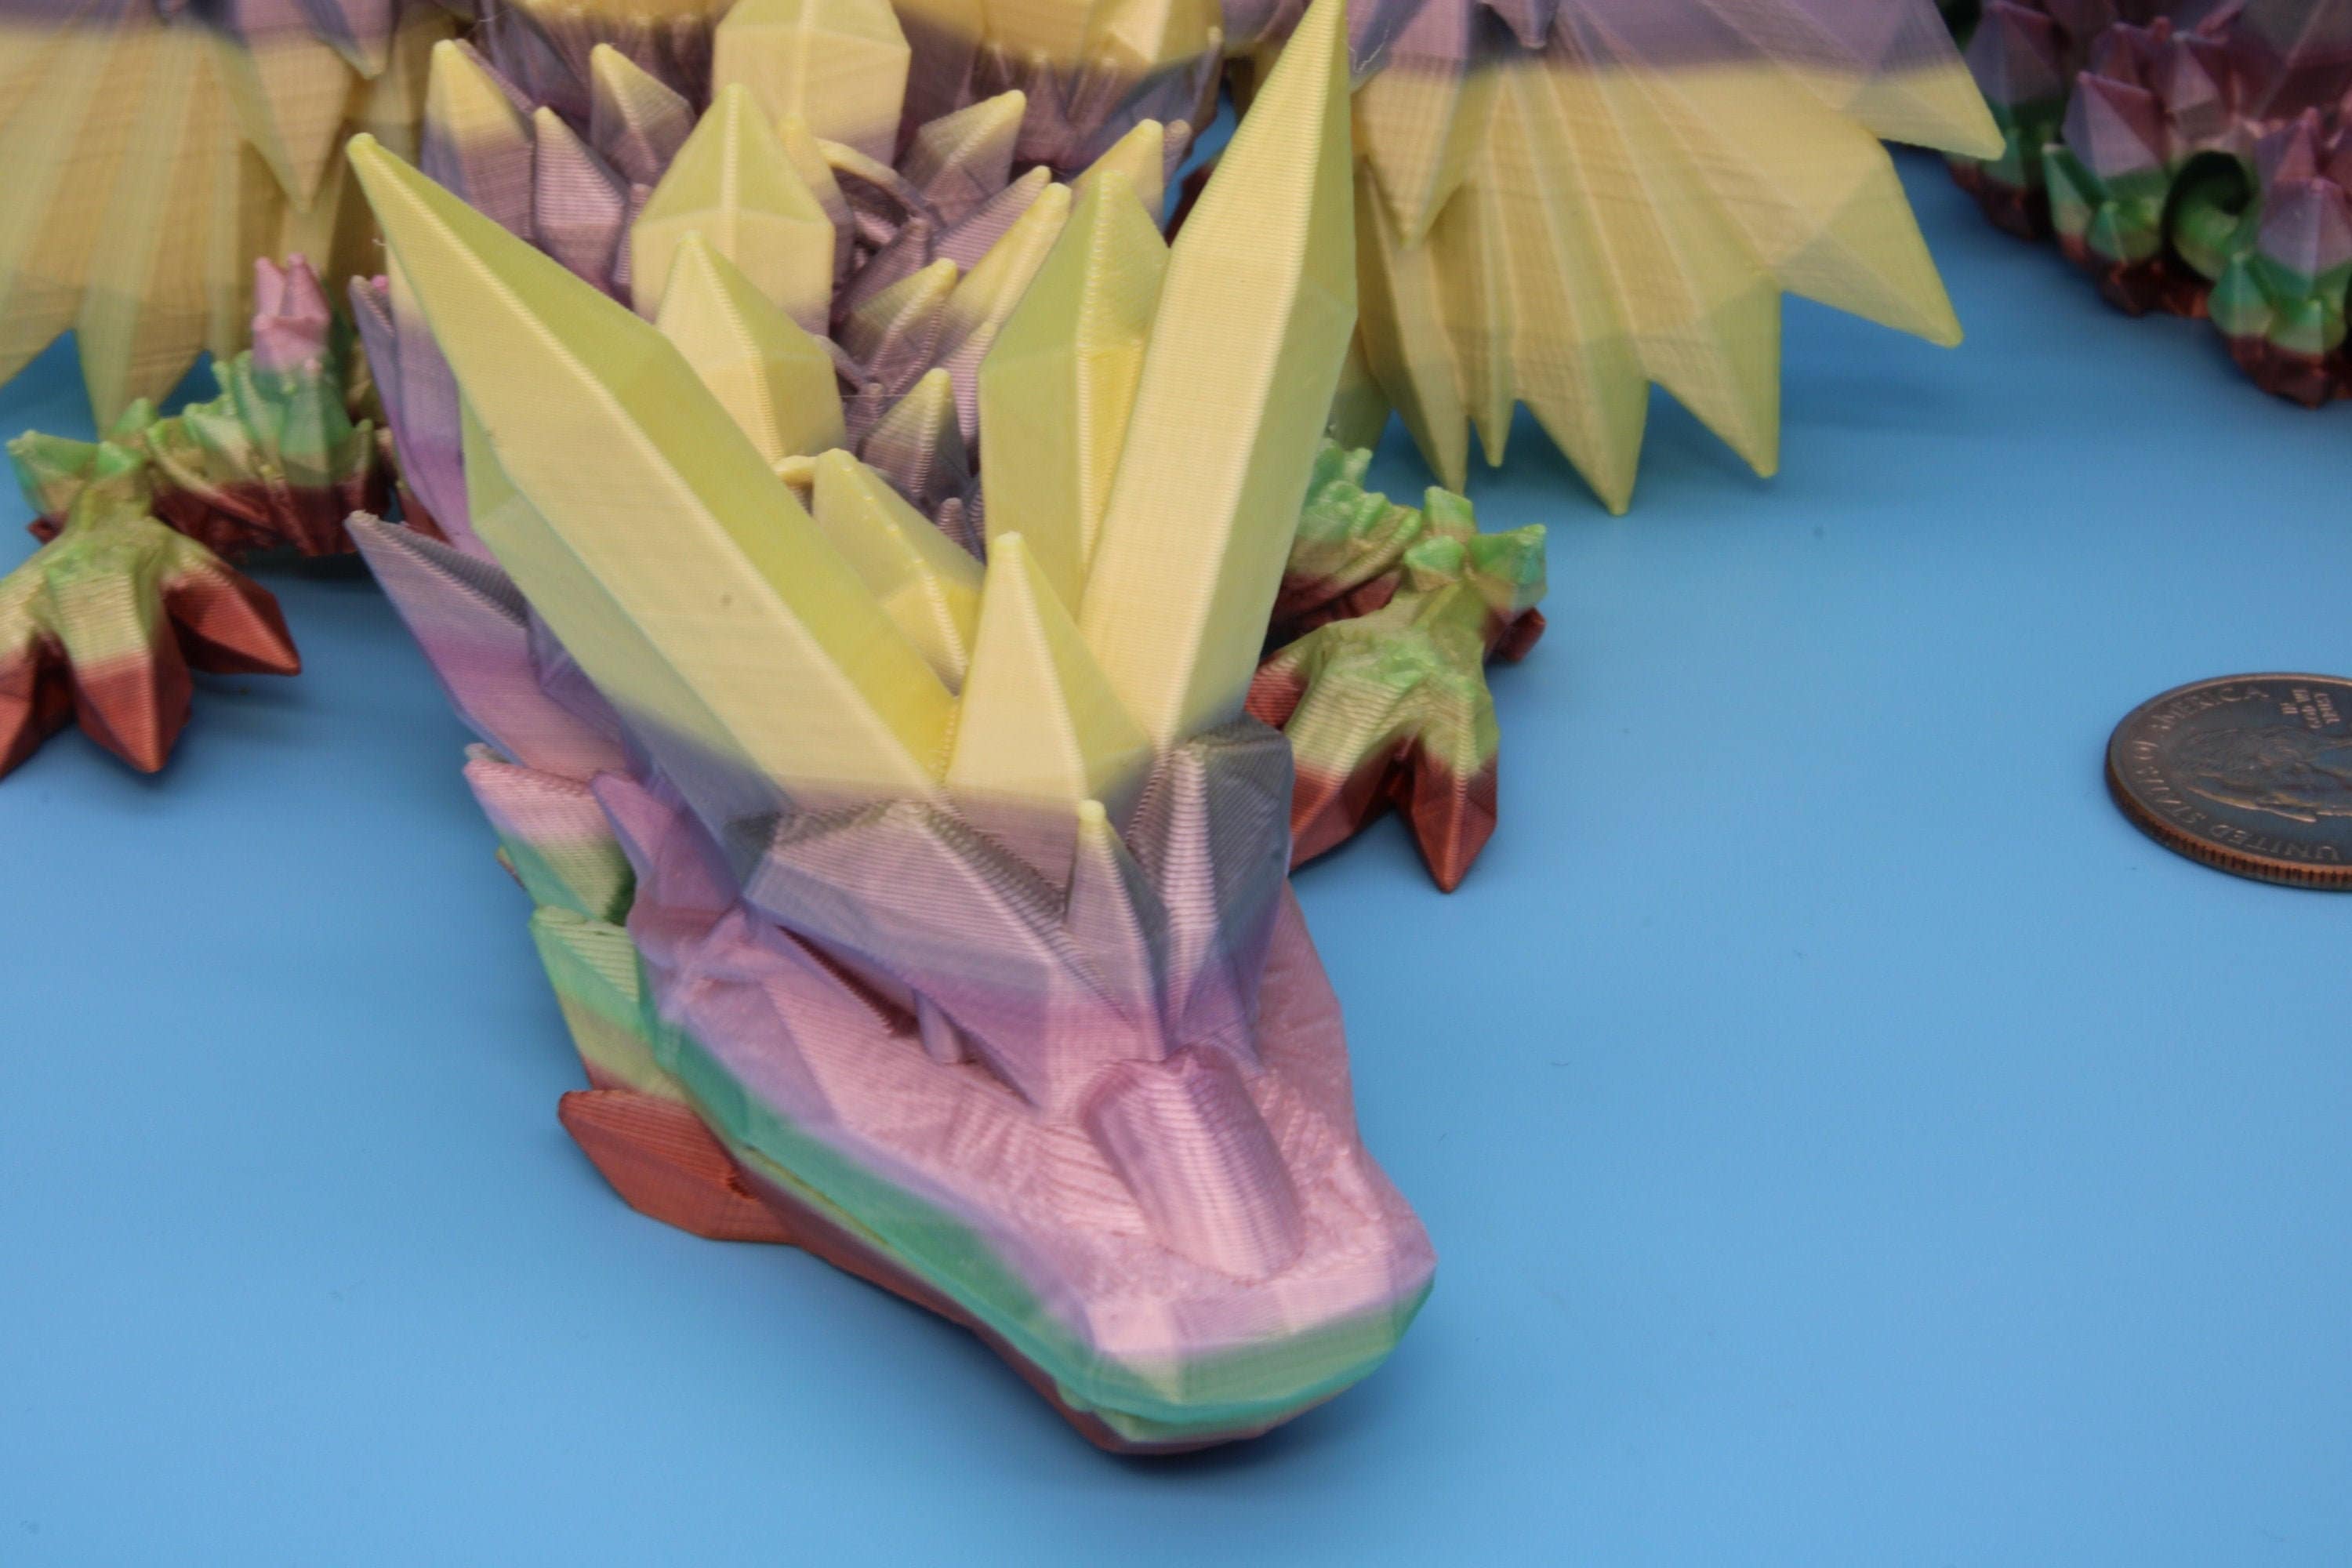 Flawed Rainbow Crystal Winged Dragon. Crystal Wing Dragon 3D printed articulating dragon. flexi Toy, 18 in. Stress Relief, Gift.